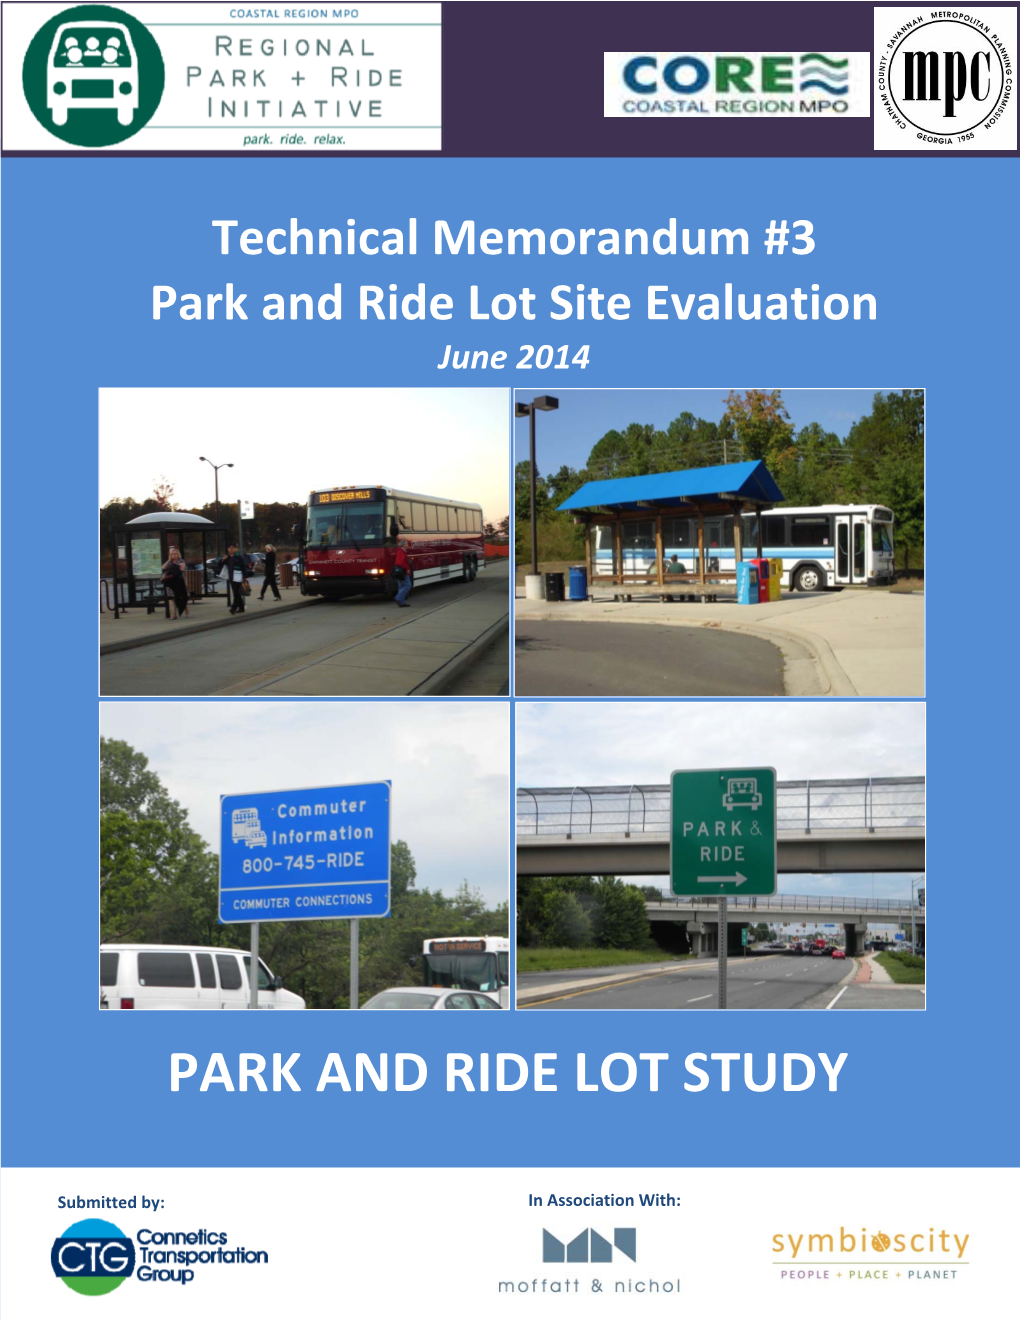 Park and Ride Lot Study